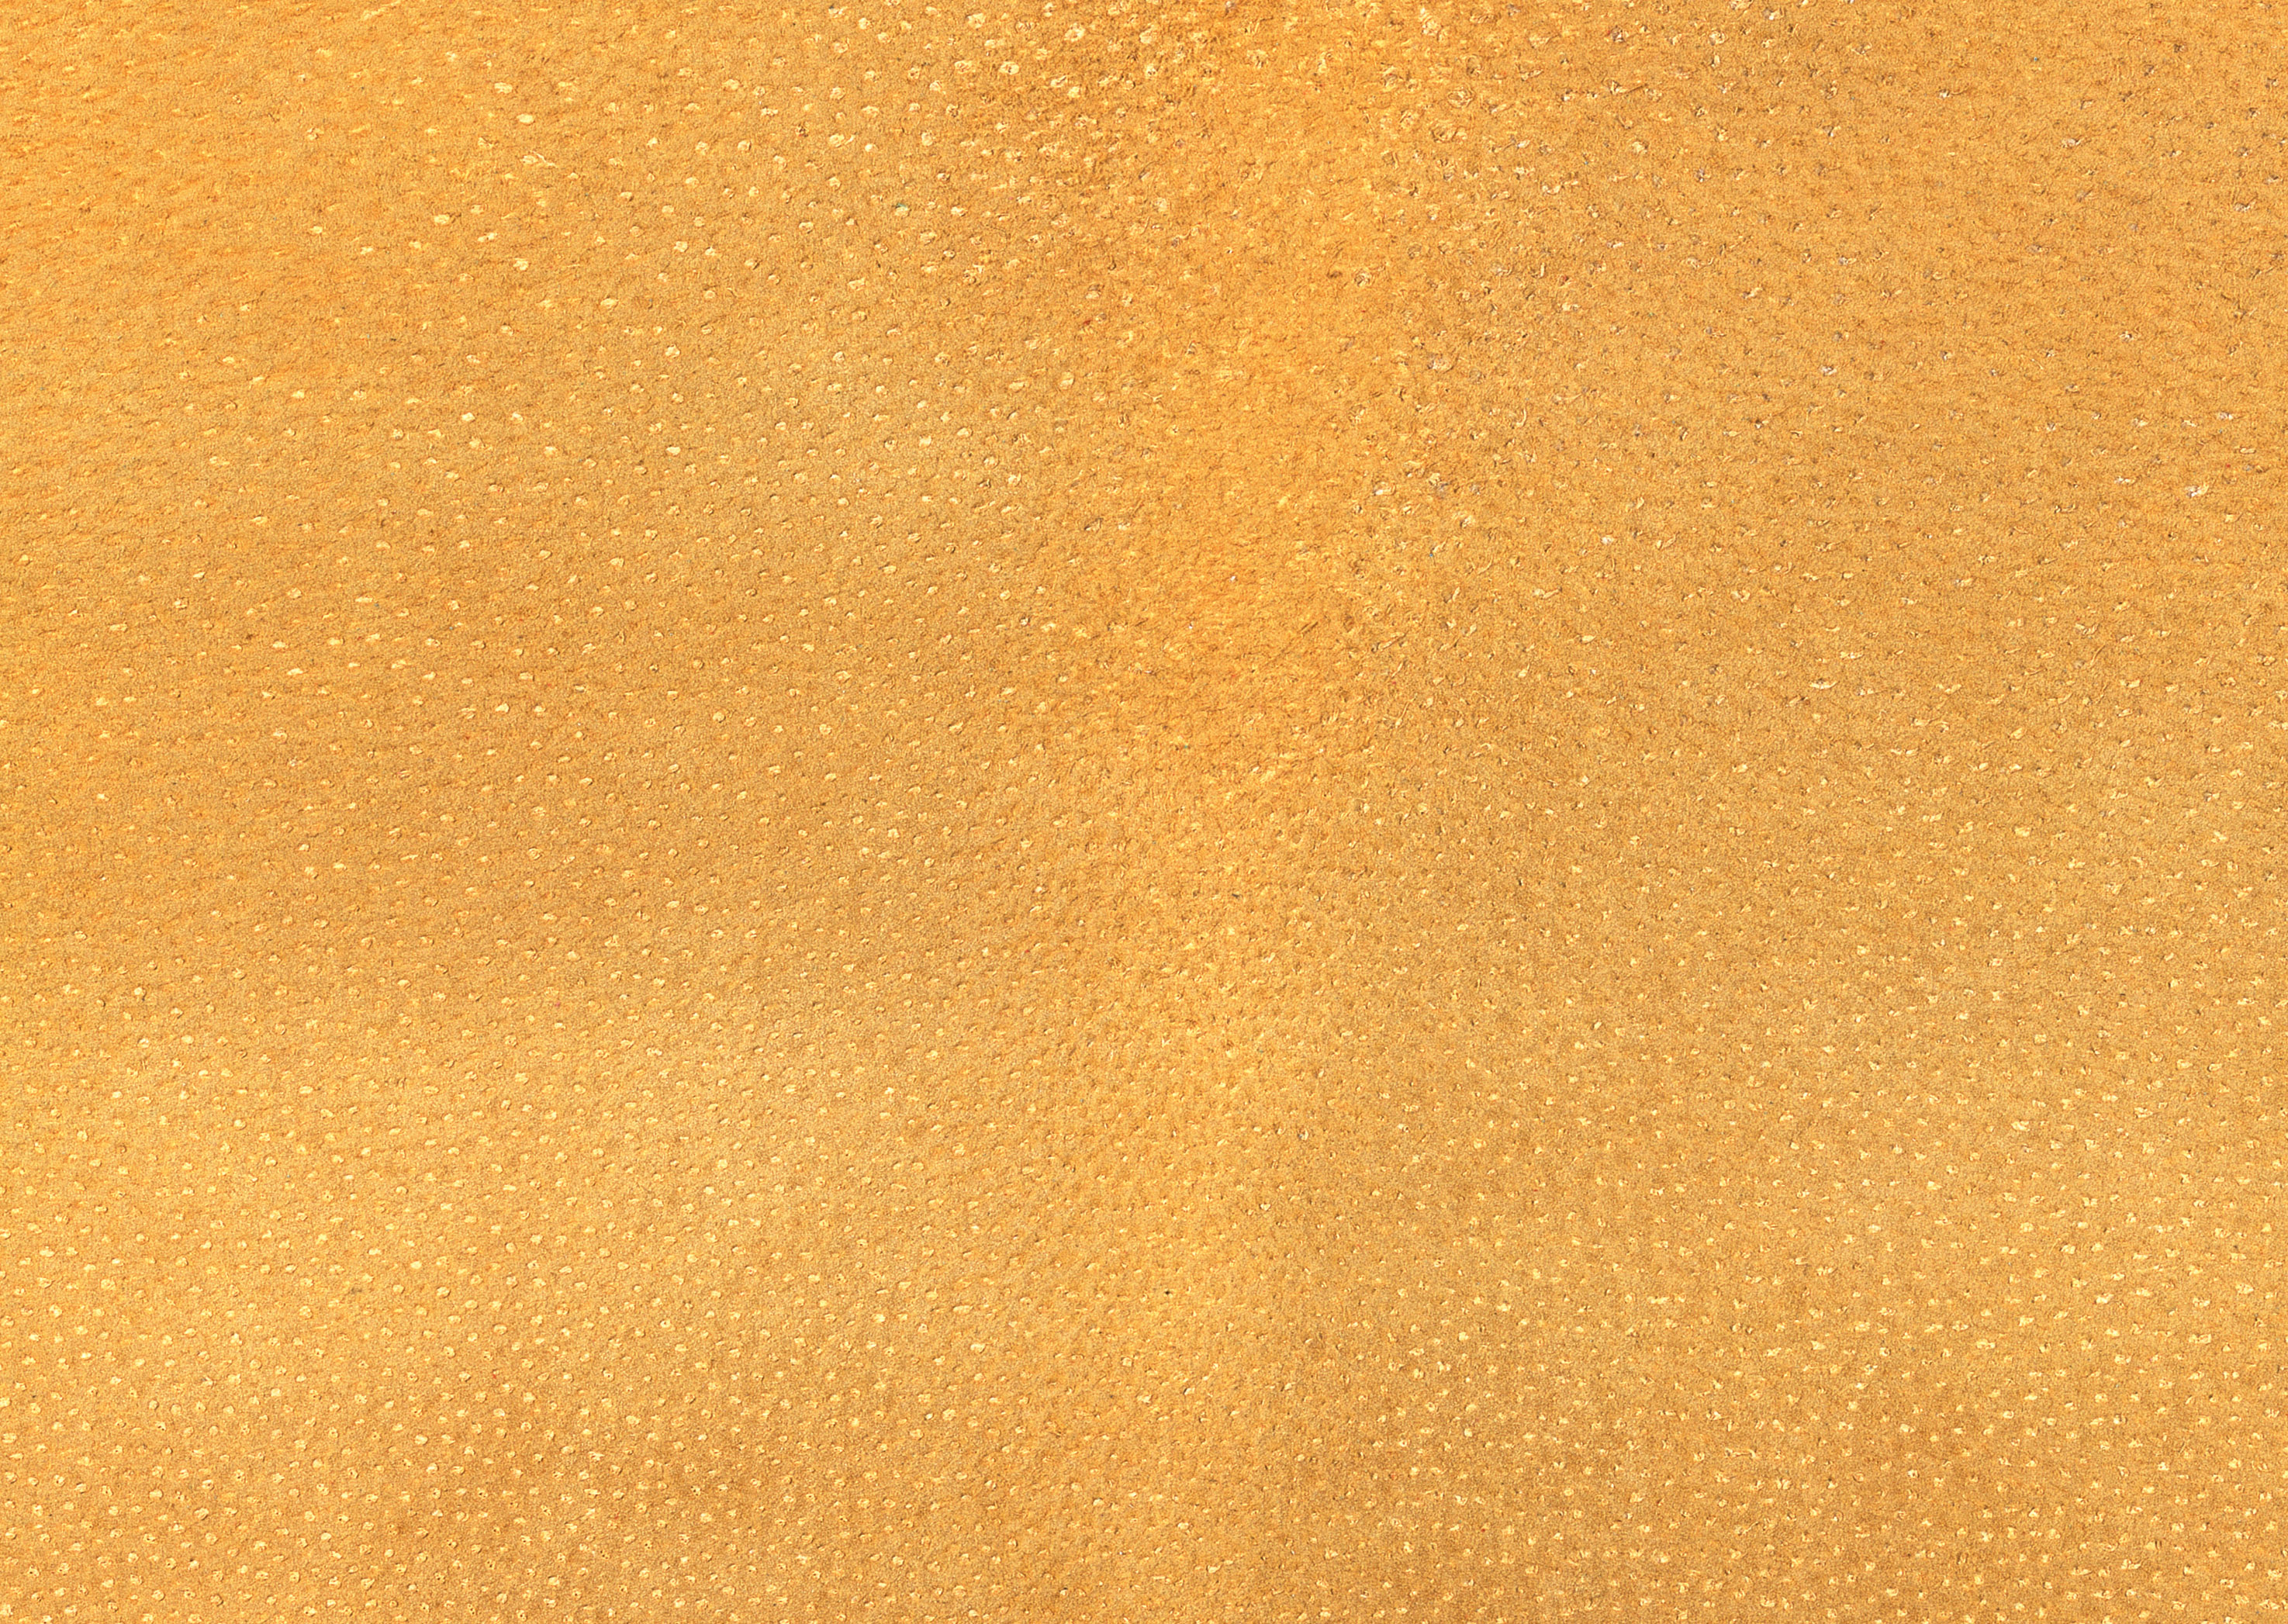 Leather big textures background image, free picture leather download